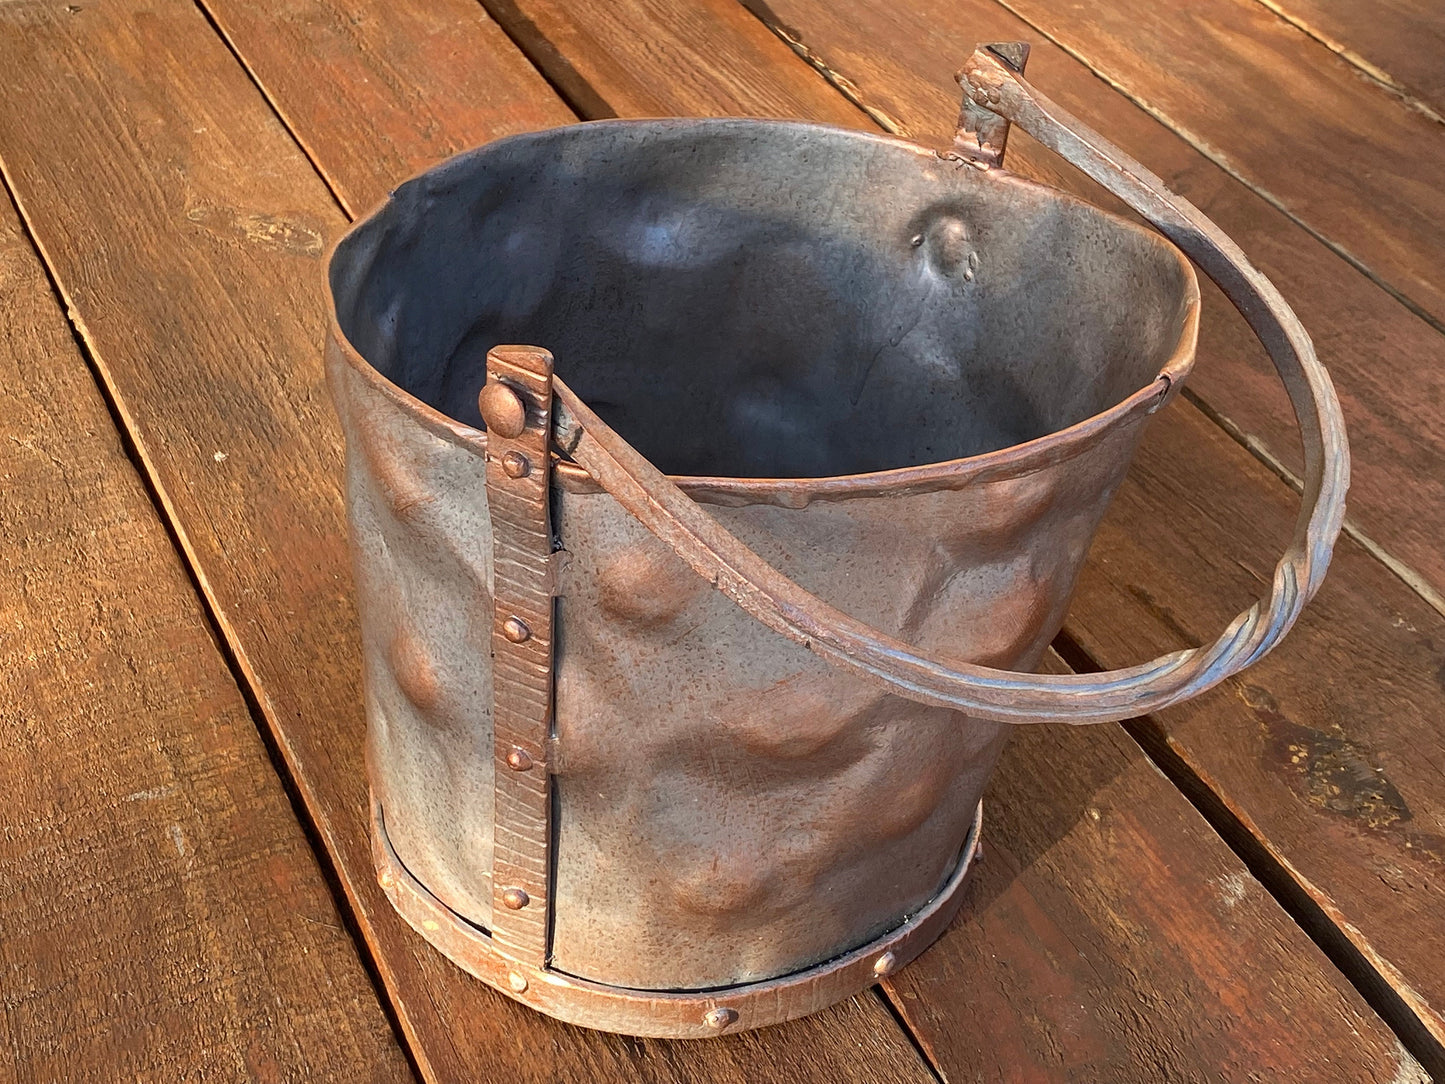 Bucket, firewood bucket, fireplace, firewood holder, fire poker, fire pit, birthday, Christmas, anniversary, Fathers Day, BBQ, grilling, dad